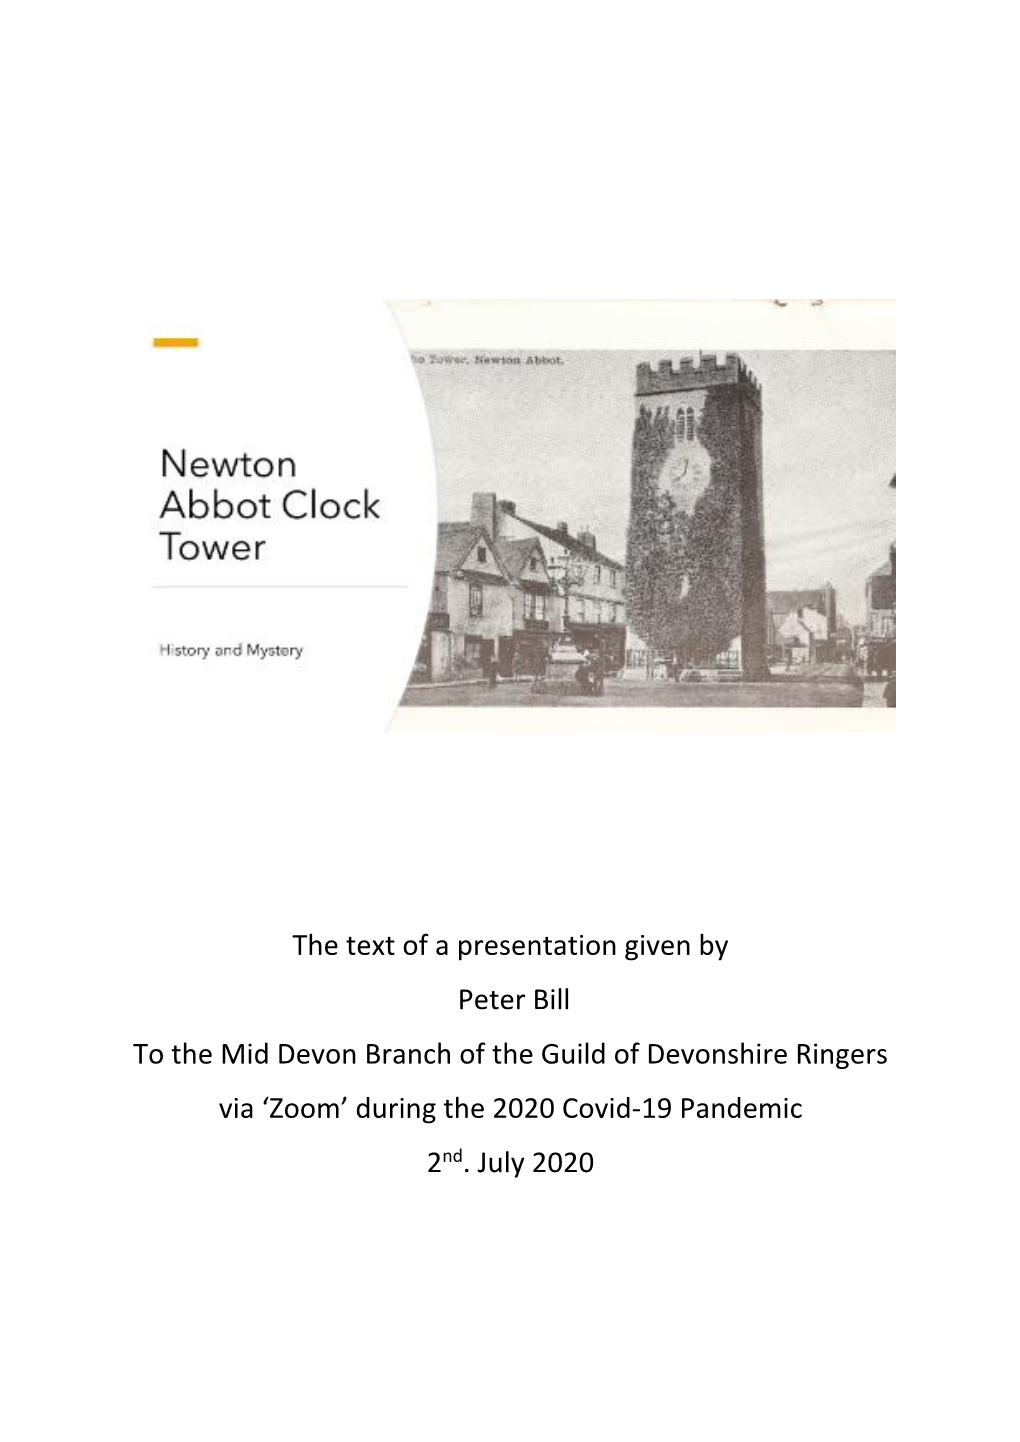 The Text of a Presentation Given by Peter Bill to the Mid Devon Branch of the Guild of Devonshire Ringers Via ‘Zoom’ During the 2020 Covid-19 Pandemic